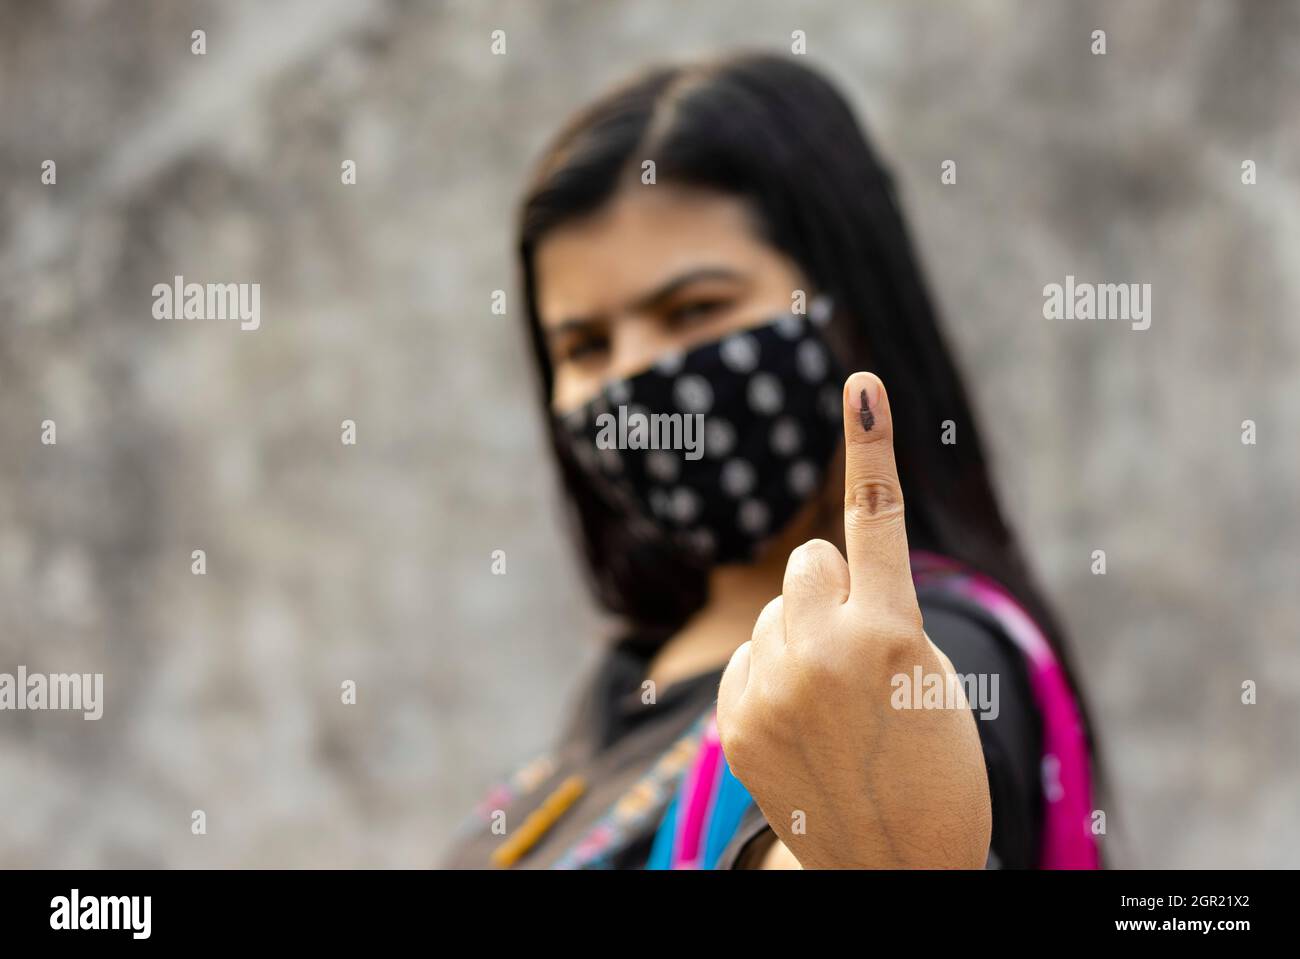 Selective Focus On Ink-marked Finger Of An Indian Woman With Safety Face Mask Stock Photo